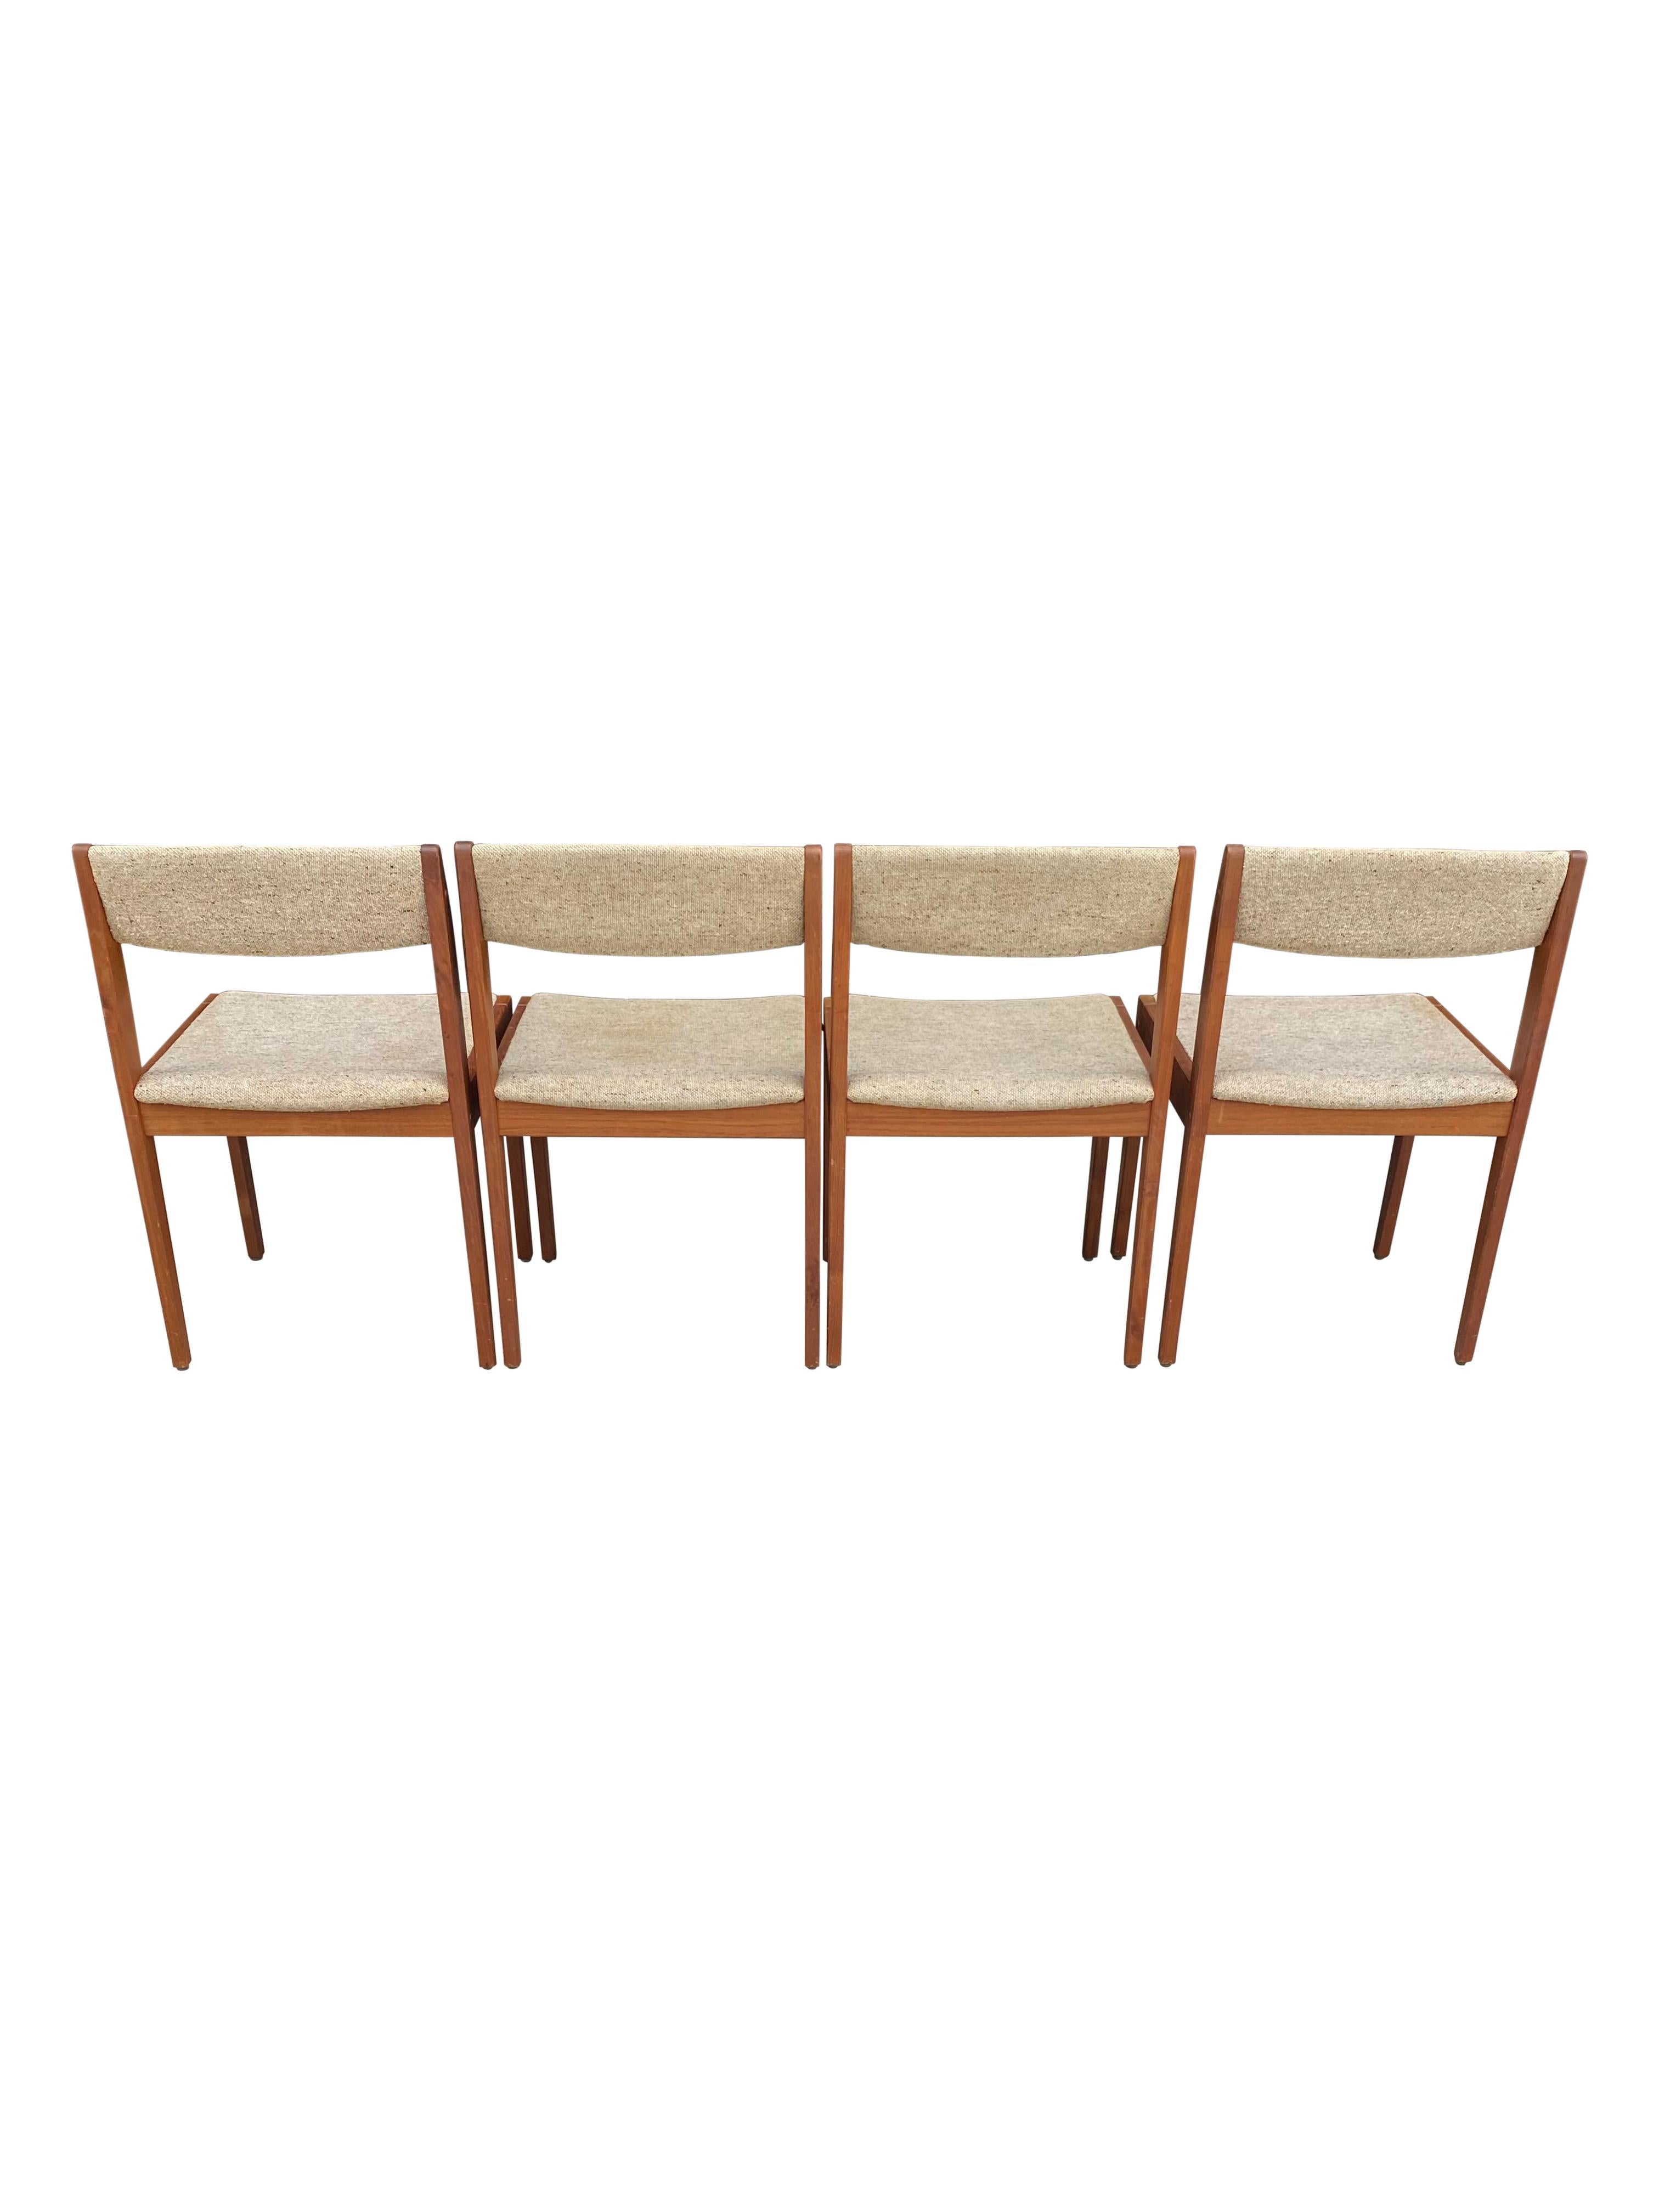 Great set of classic Danish modern dining chairs. Executed in trak and original upholstery. Even wood tones throughout and structurally sound. Signed underneath the seat. Easy to reupholster if you prefer another color or textile.